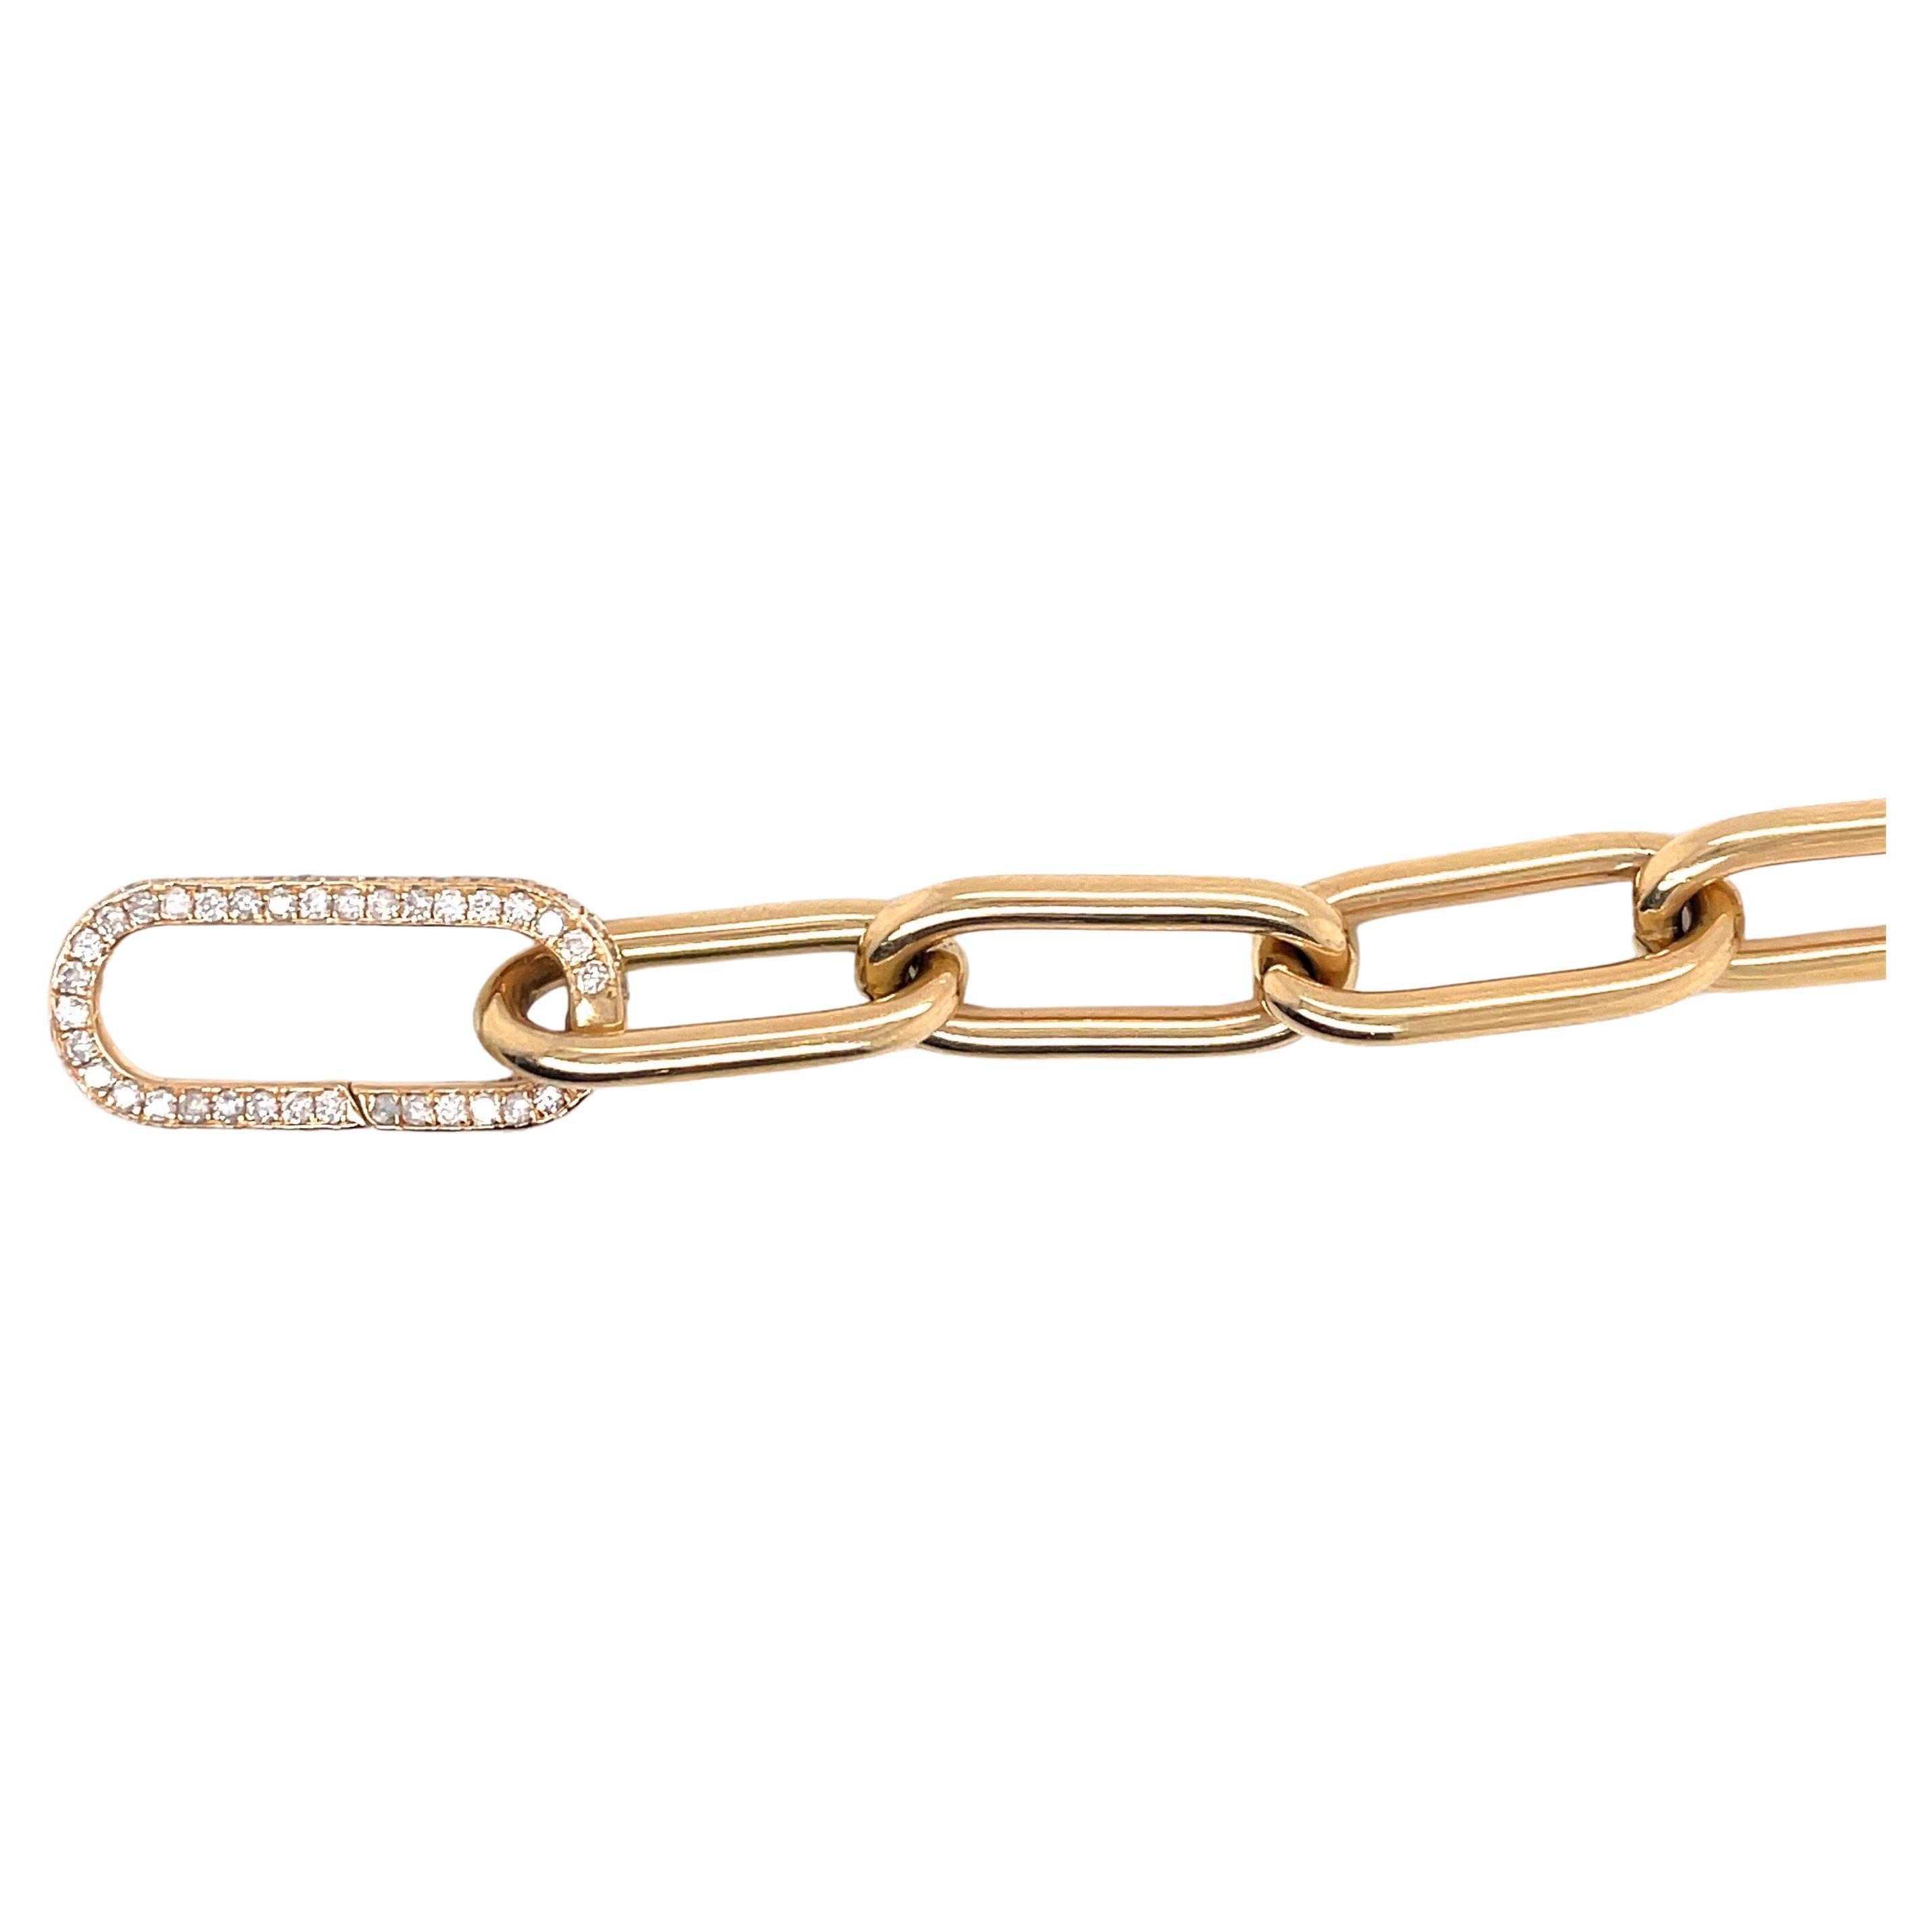 gold chain with diamond clasp